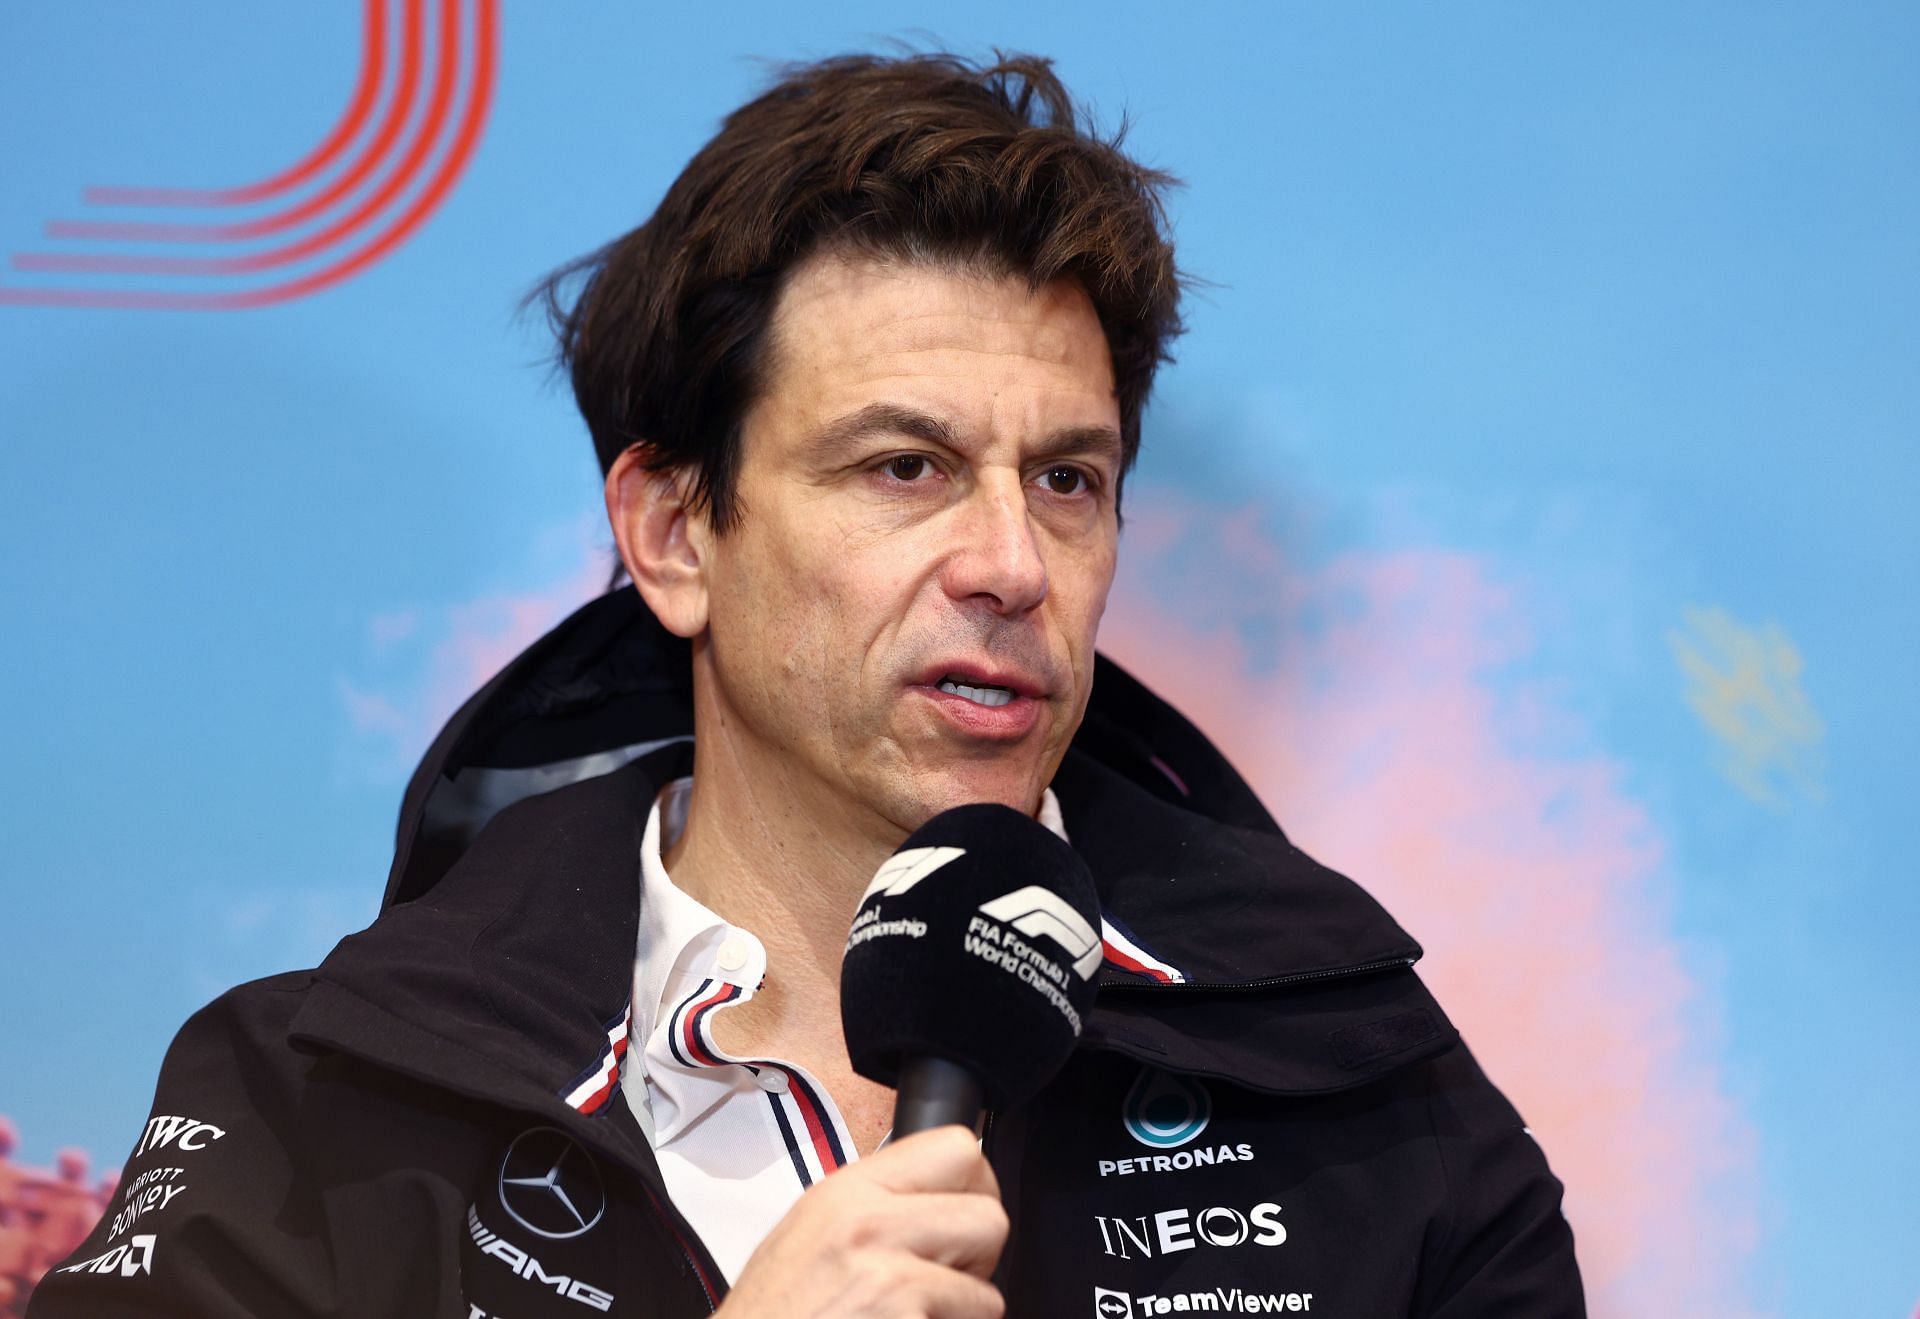 Toto Wolff gave his views on why he felt Audi was a better option than Andretti as the 11th team on the grid